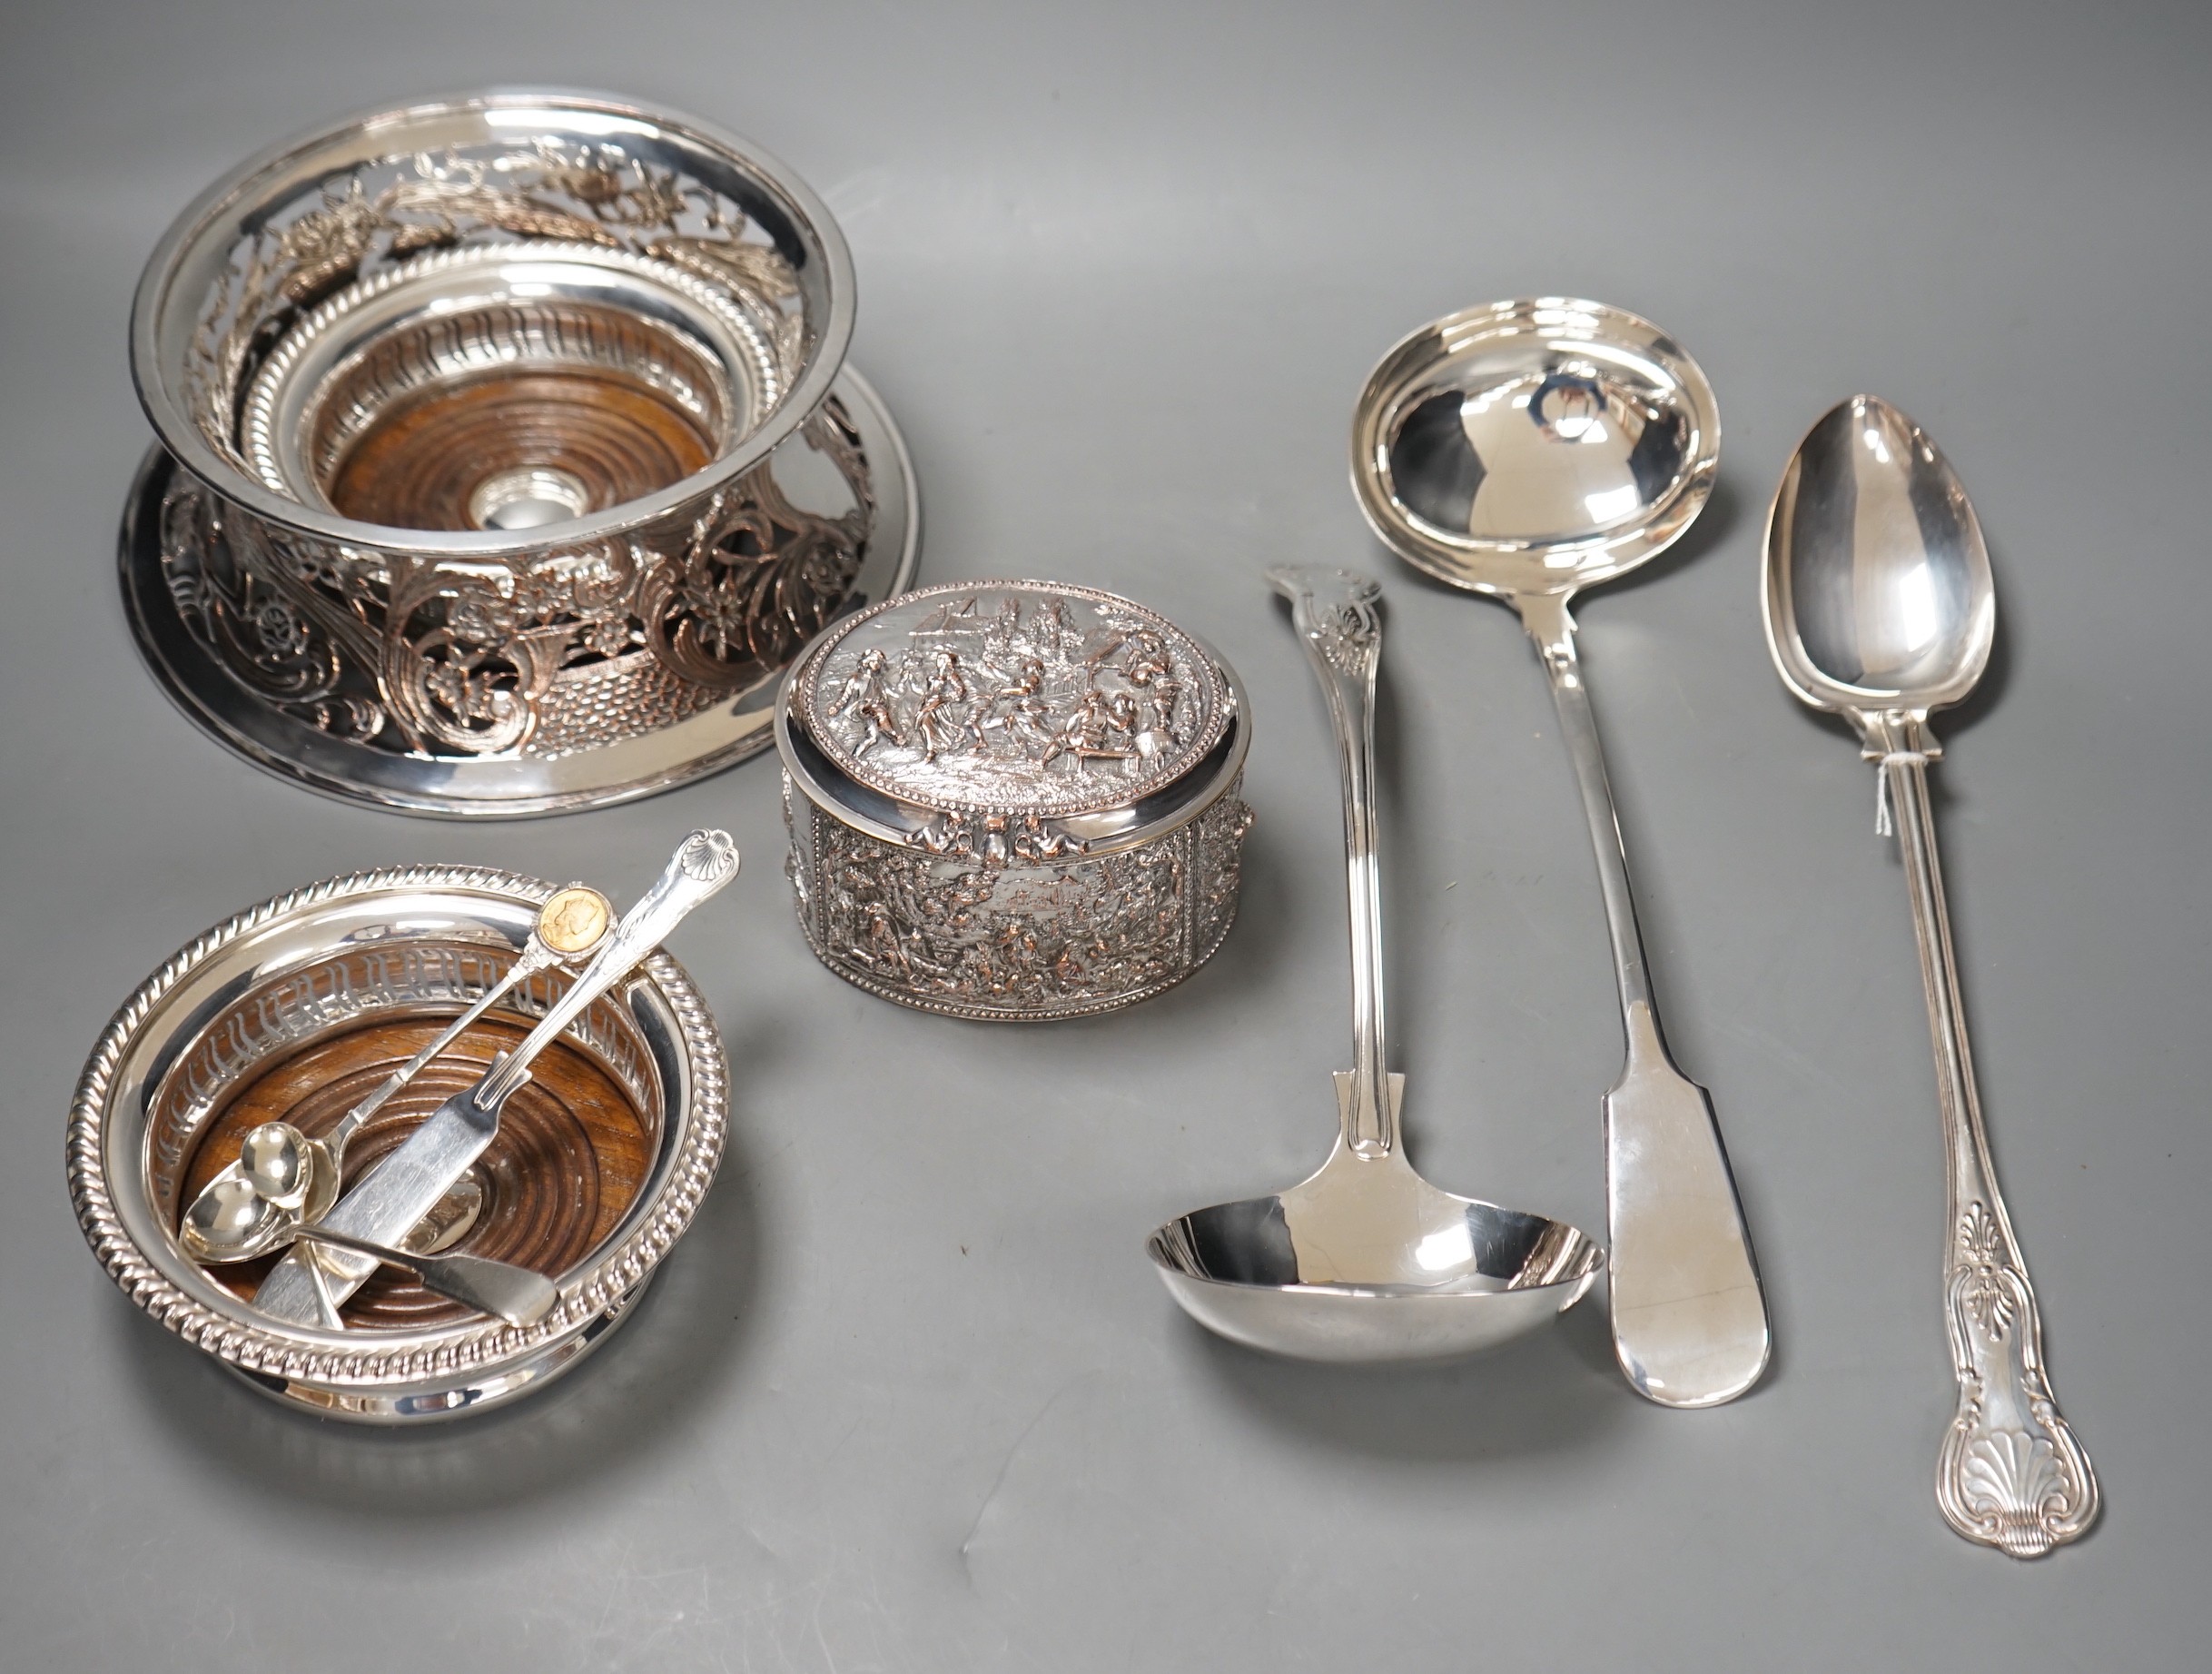 A plated dish ring, a pair of plated coasters, electrotype box, platted basting spoon and soup ladle and four spoons